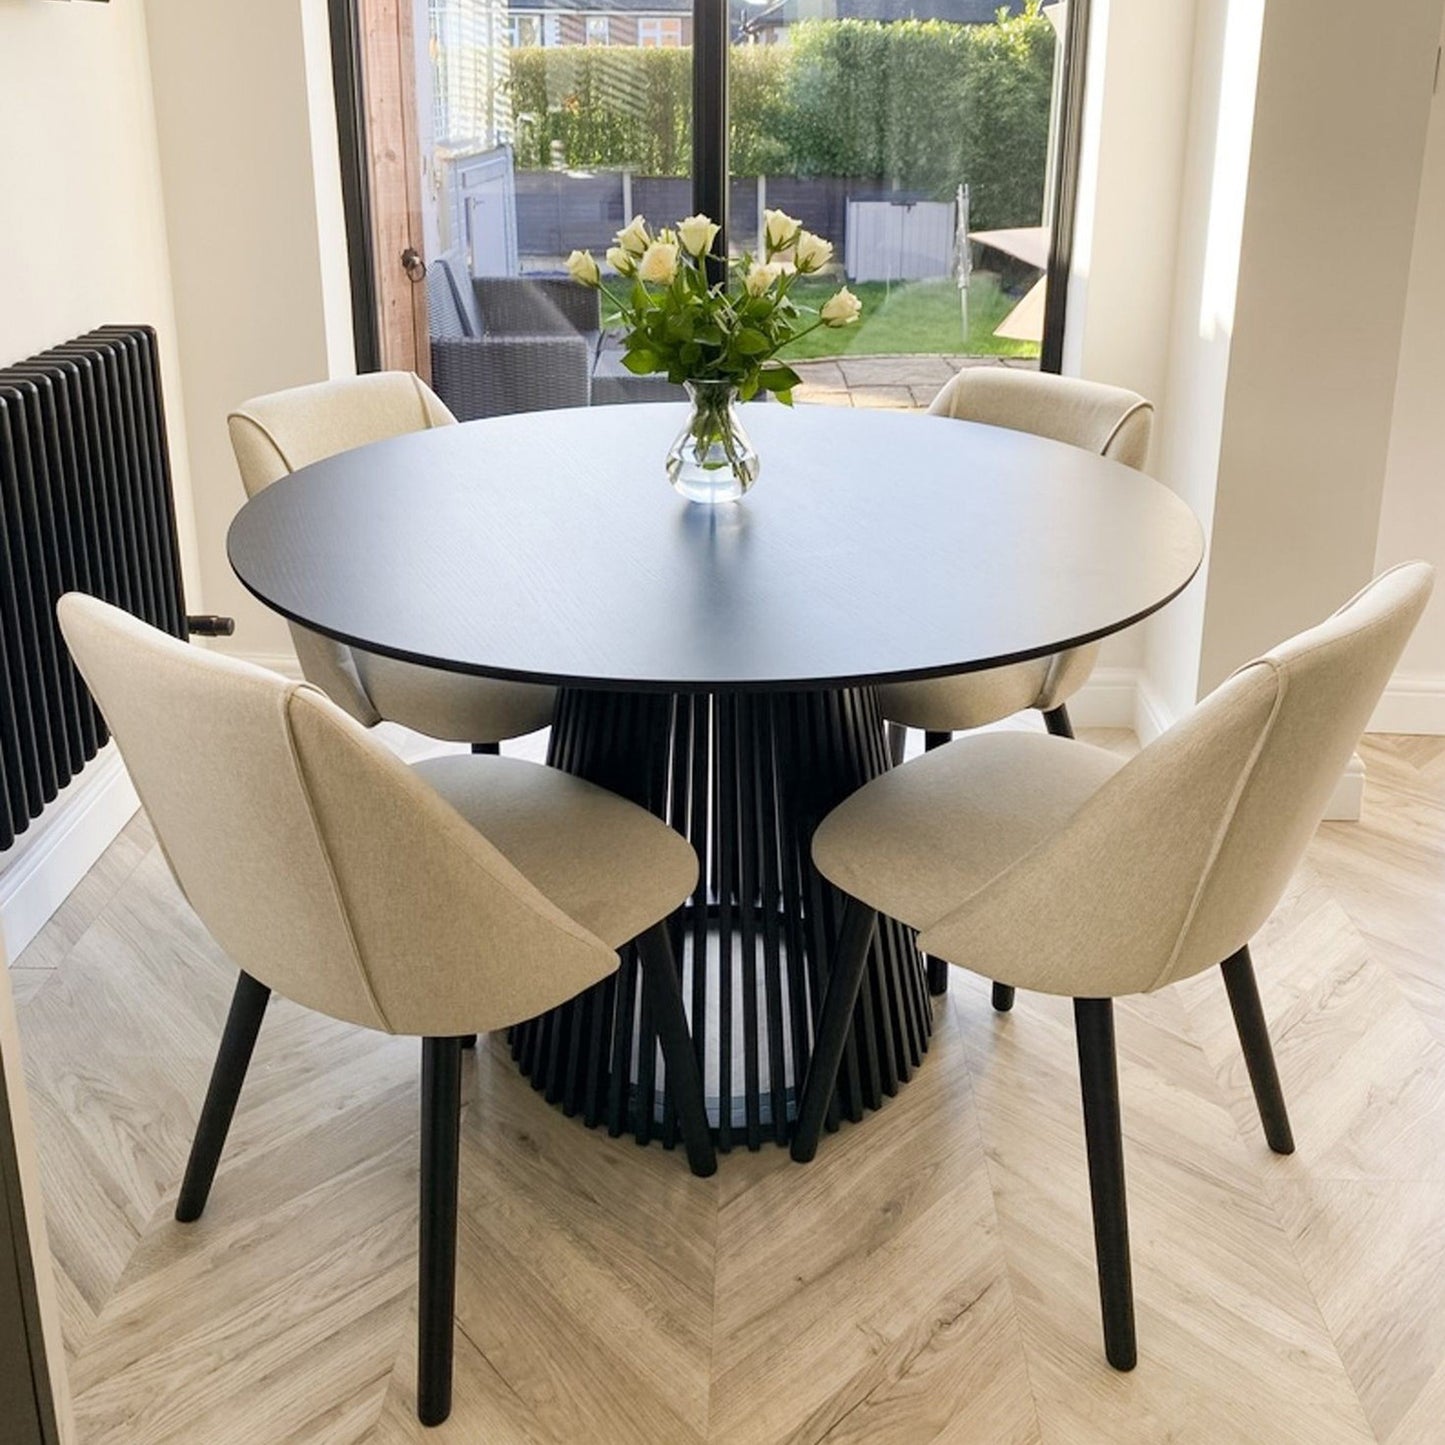 Willow 4 Seater Black Dining Table Set - Freya Oatmeal Dining Chairs with Black Legs